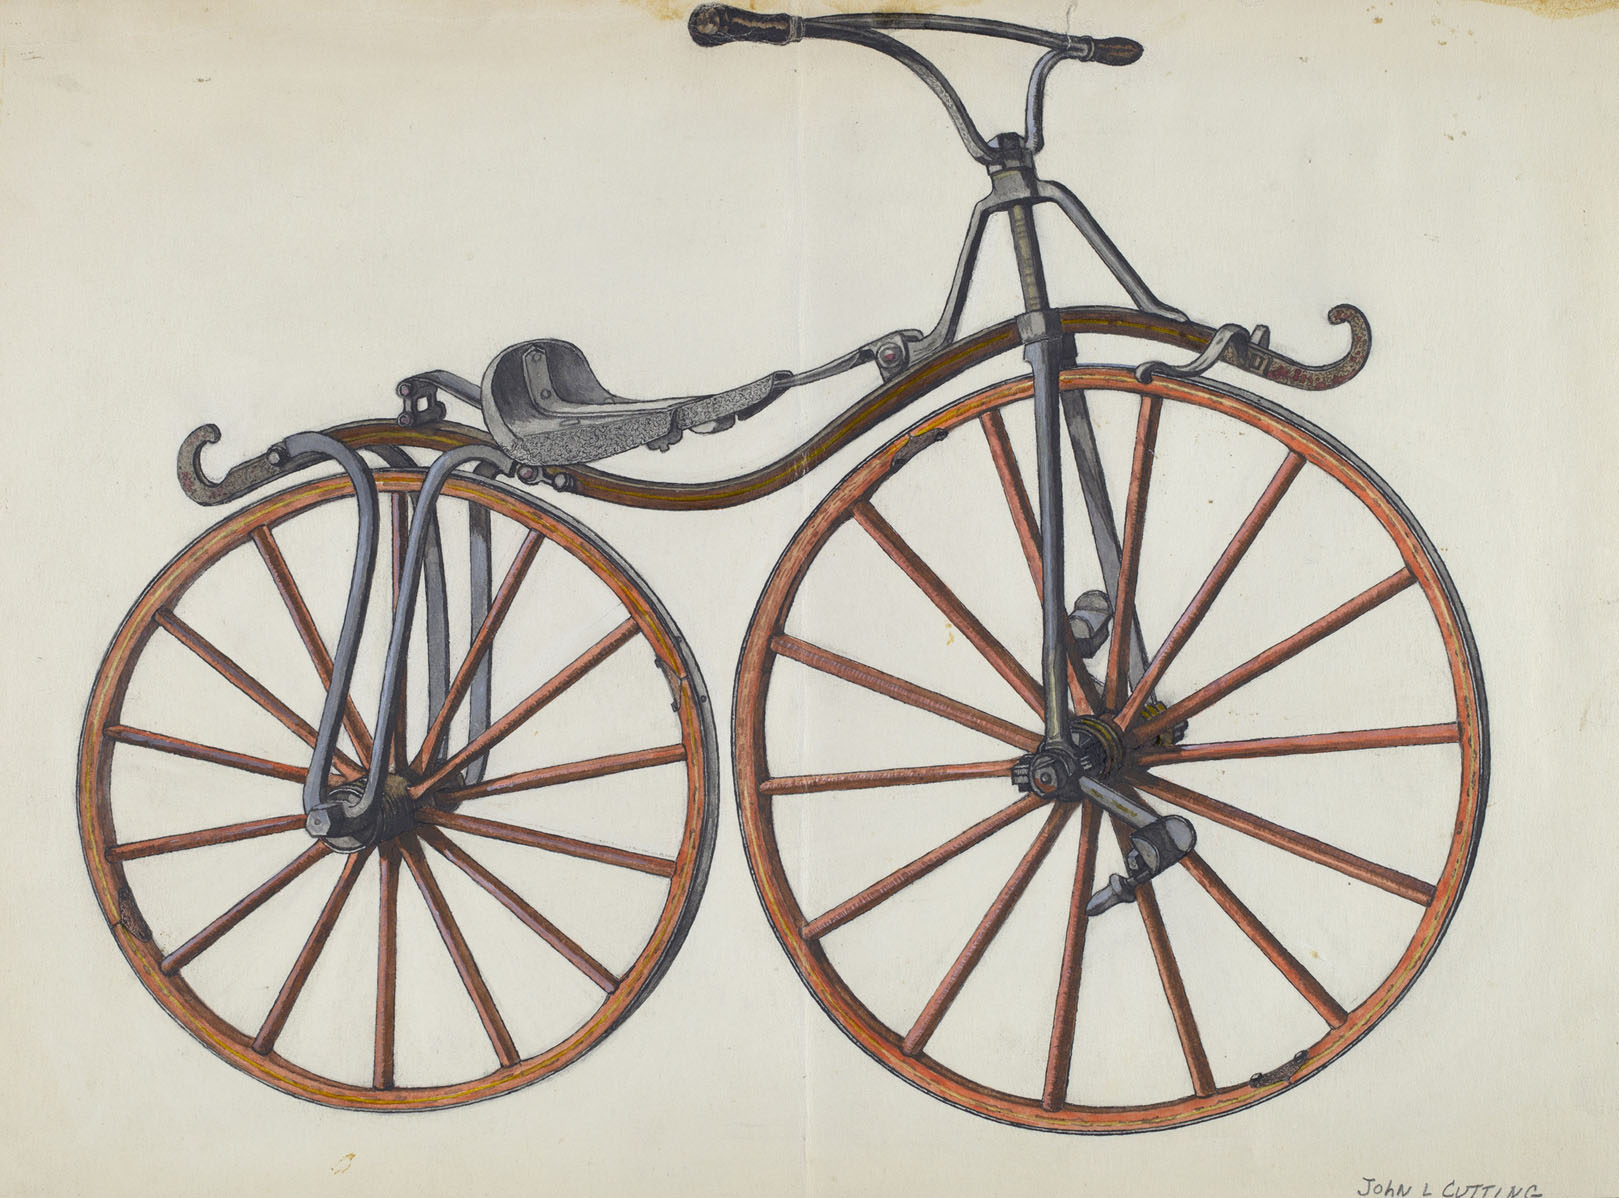 John Cutting, Bicycle, American, active c. 1935, 1935/1942, watercolor, graphite, pen and ink, and gouache on paper, Index of American Design